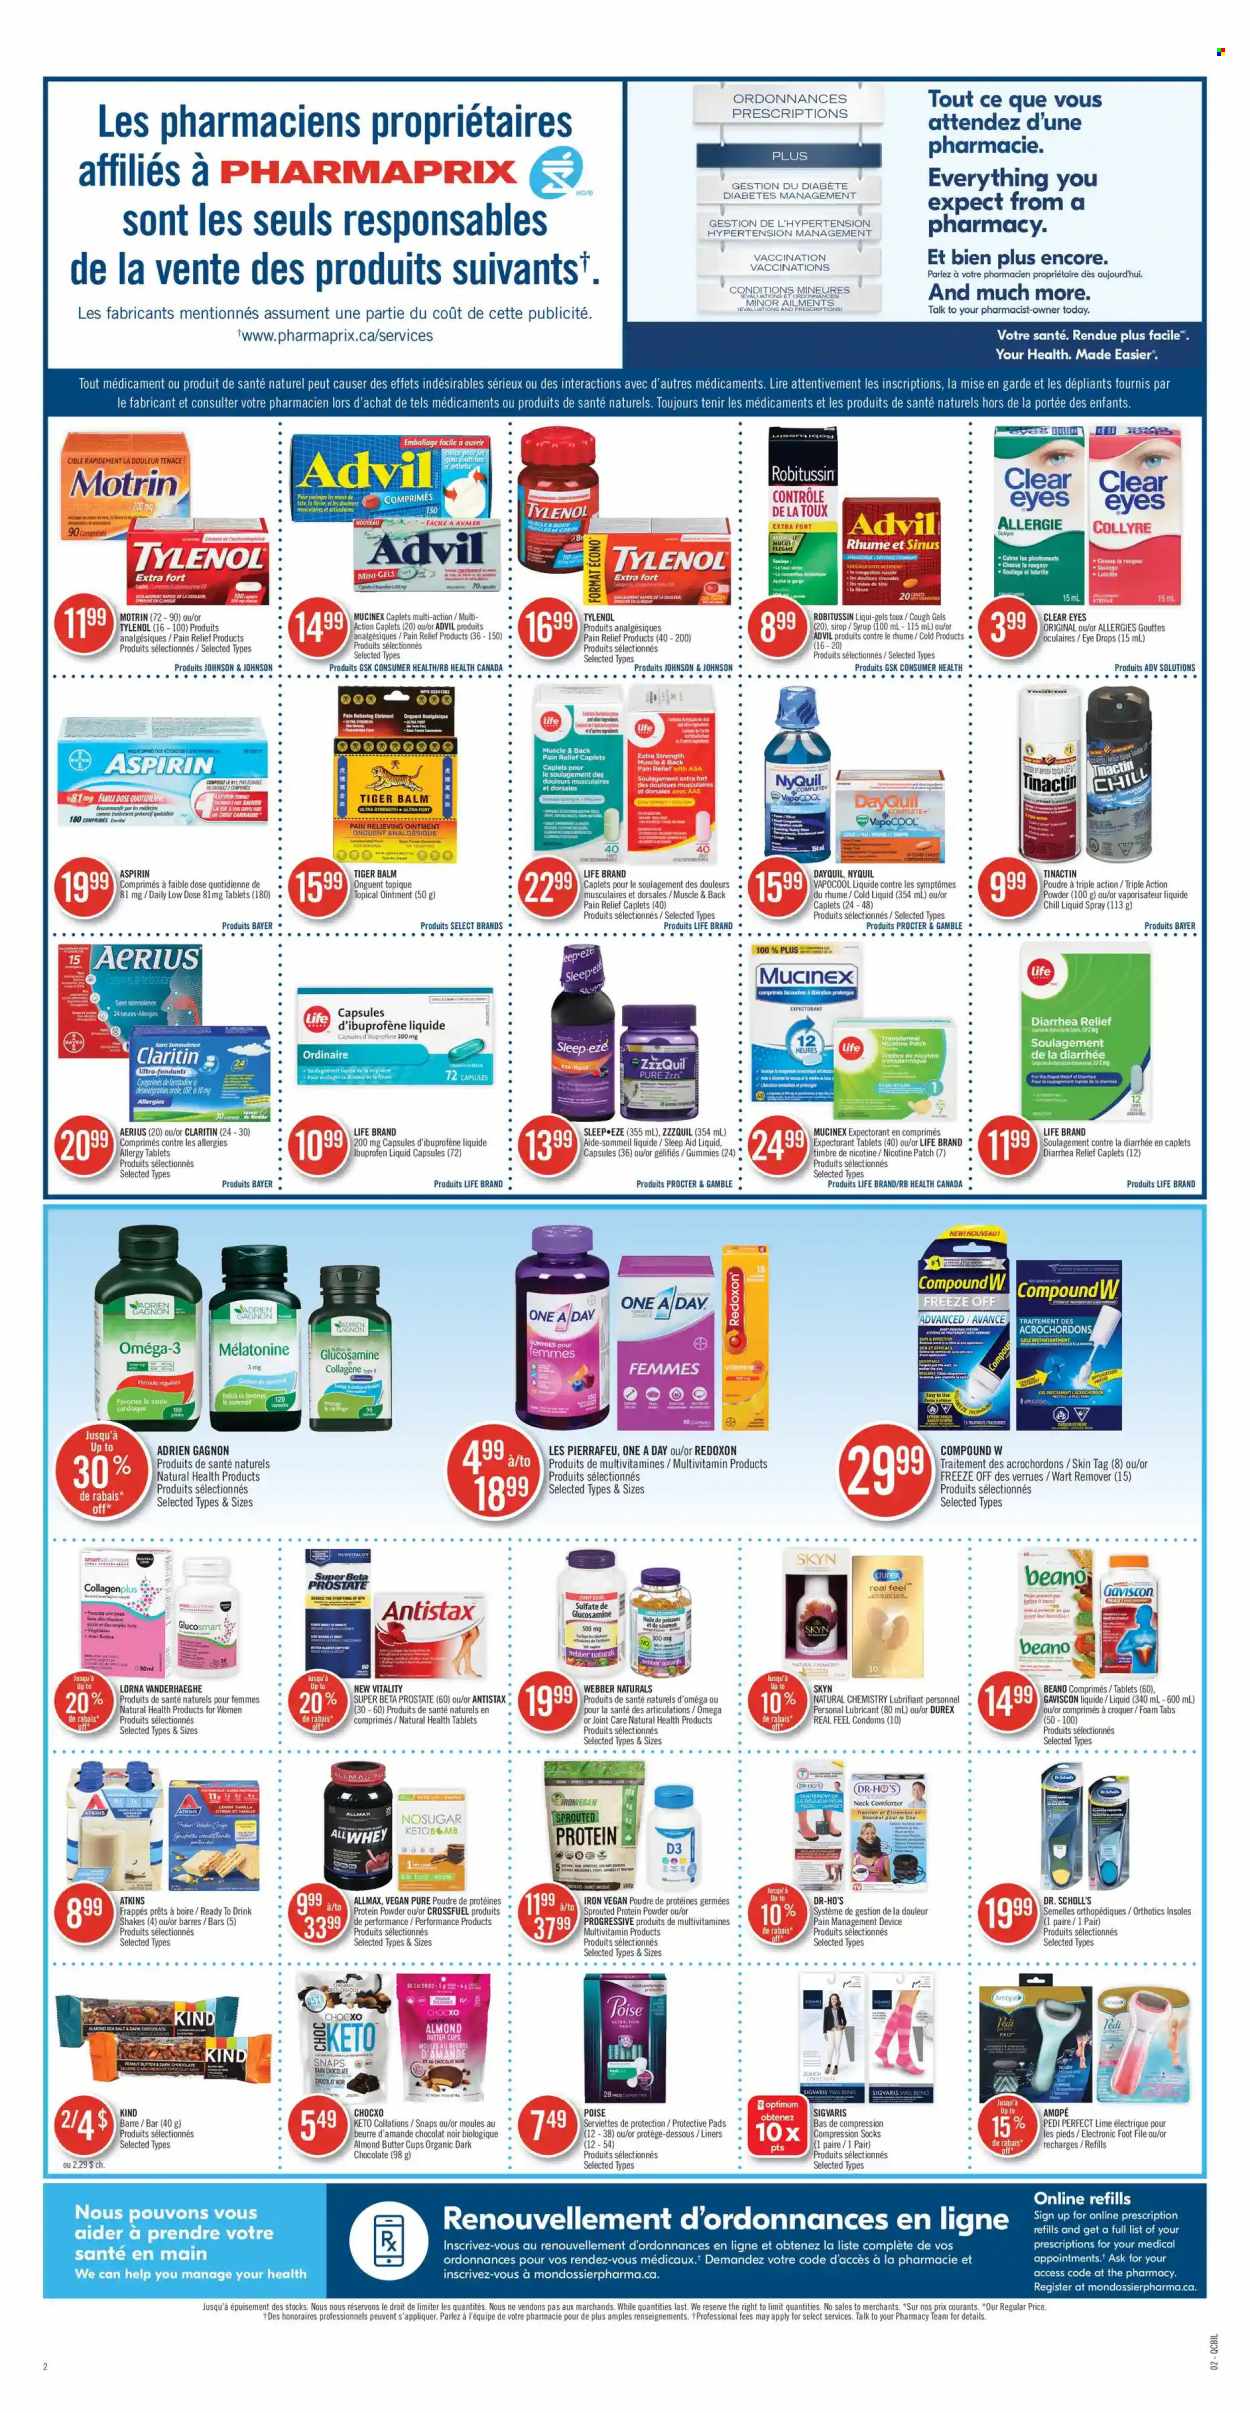 thumbnail - Pharmaprix Flyer - October 09, 2021 - October 14, 2021 - Sales products - shake, almond butter, chocolate, dark chocolate, syrup, Johnson's, ointment, lubricant, comforter, iron, pain relief, DayQuil, glucosamine, Mucinex, multivitamin, Tylenol, ZzzQuil, Ibuprofen, NyQuil, Omega-3, eye drops, Advil Rapid, whey protein, Gaviscon, vitamin D3, Low Dose, aspirin, Bayer, Motrin, Dr. Scholl's, Robitussin. Page 2.